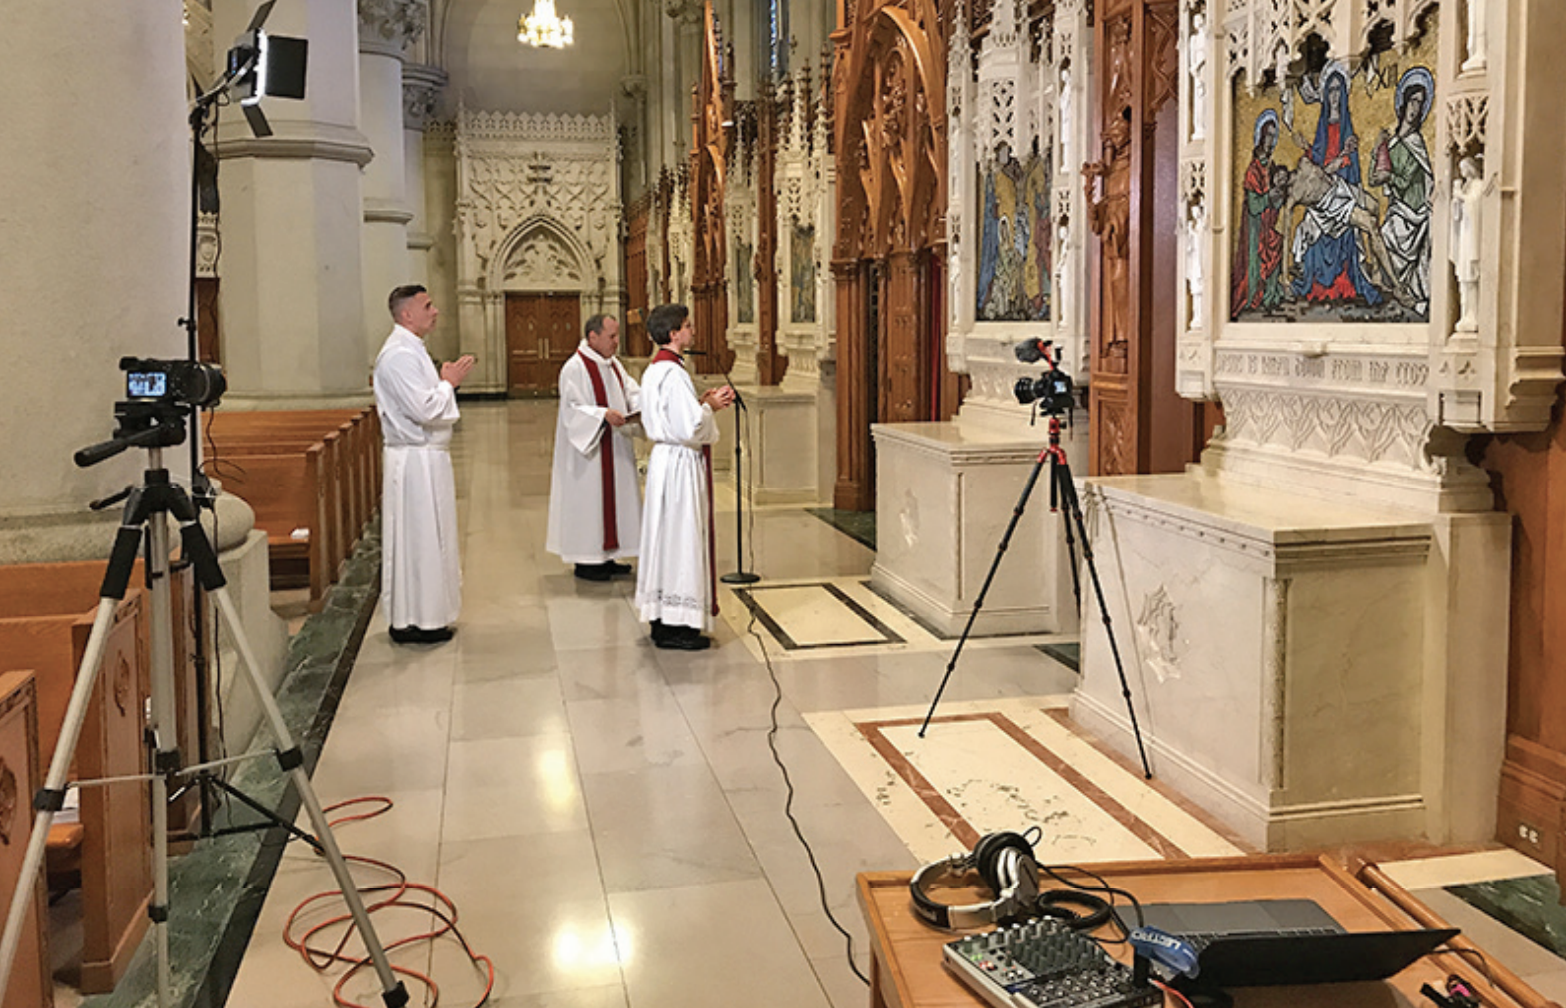 From left, seminarian Lynx Soliman, Bishop Manuel Cruz and Father John Barno participate in a video production of the Stations of the Cross at the Cathedral Basilica of the Sacred Heart in Newark. It was based on “The Way of the Cross” with reflections from Cardinal Tobin inspired by St. Alphonsus Liguori. (Photo by Jai Agnish/Archdiocese of Newark)